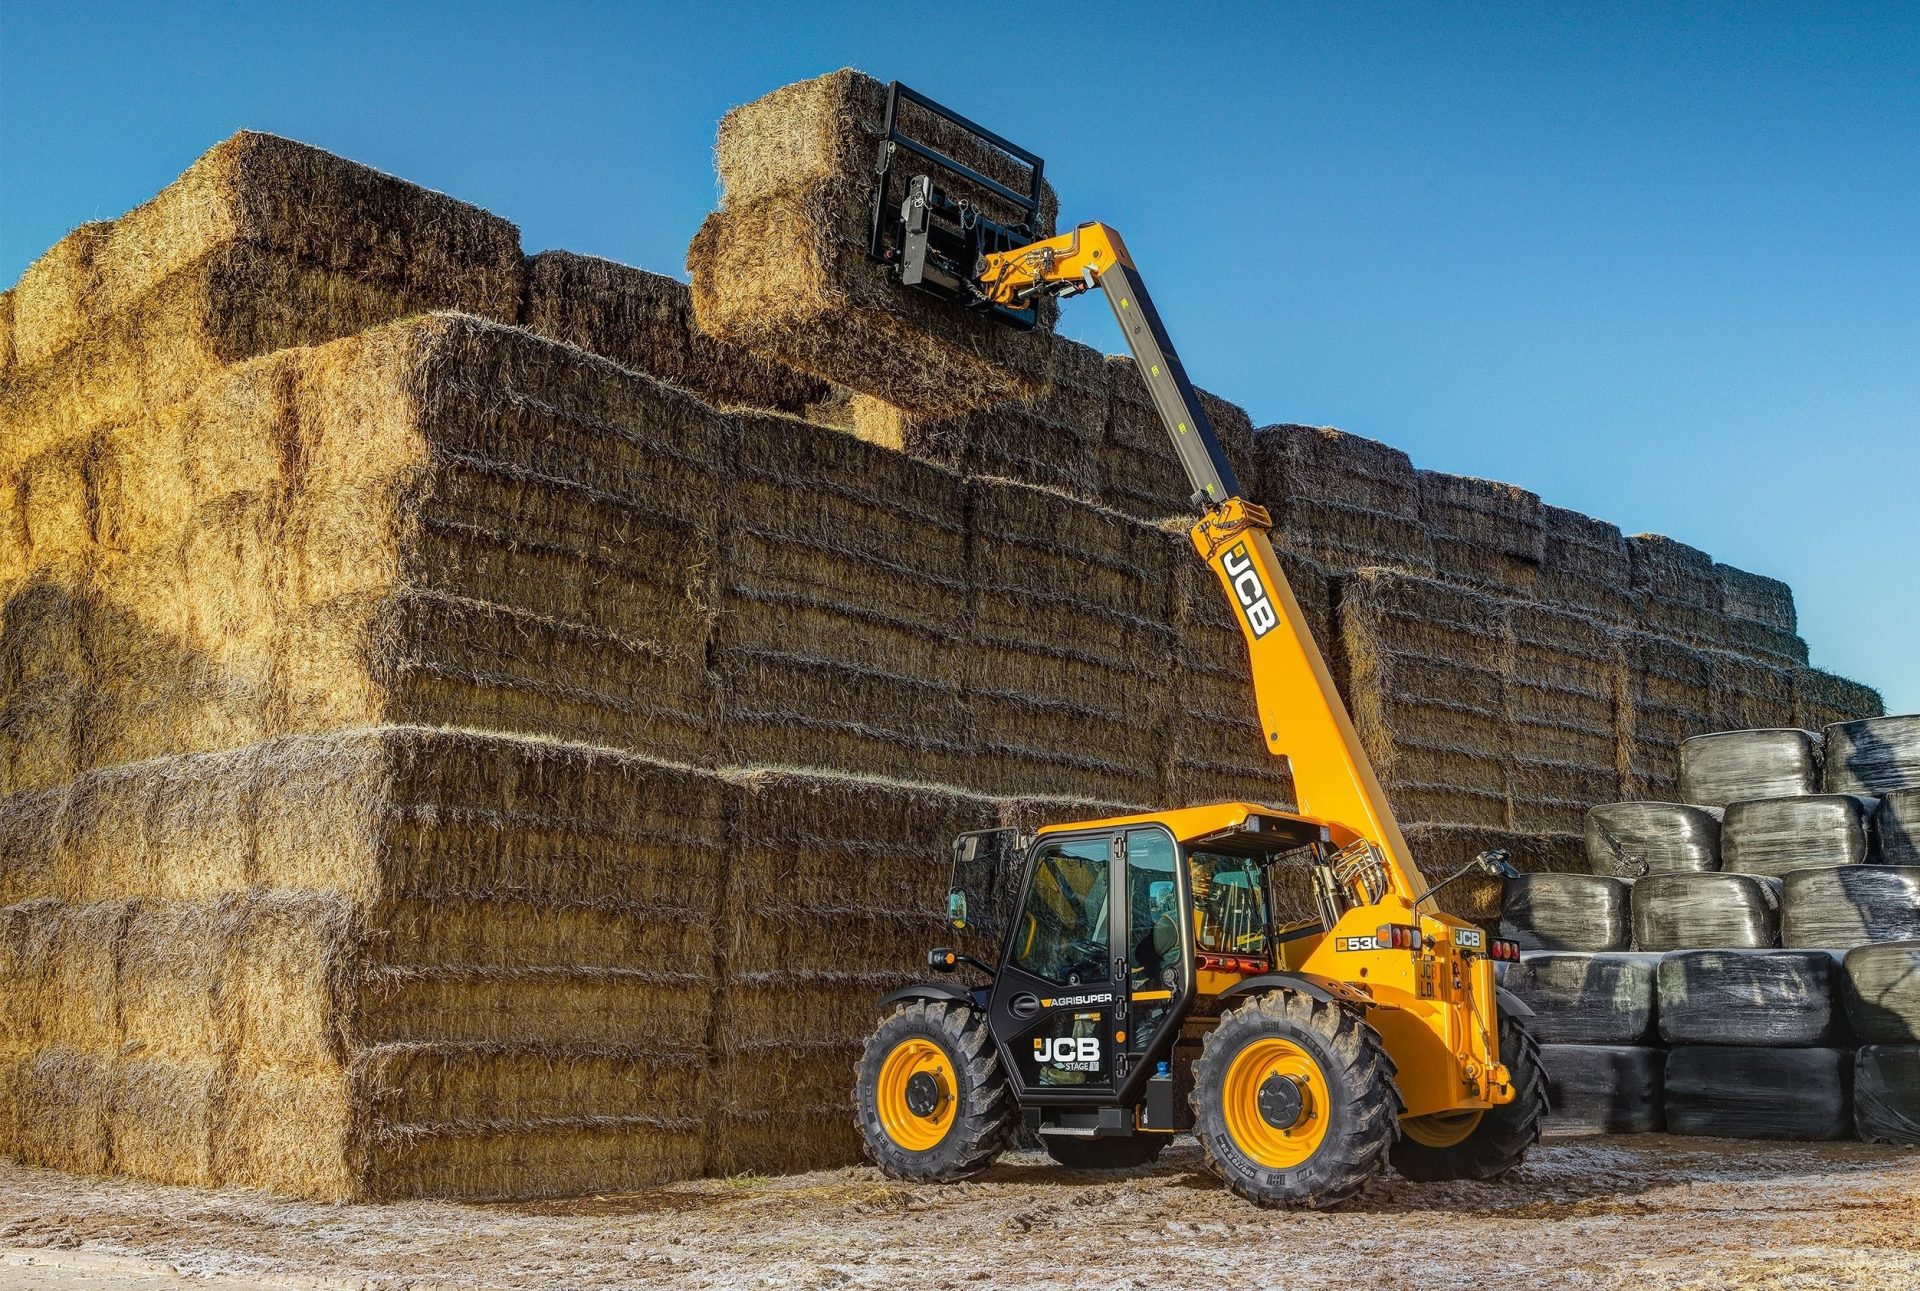 Compact JCB Loadall for tight spaces